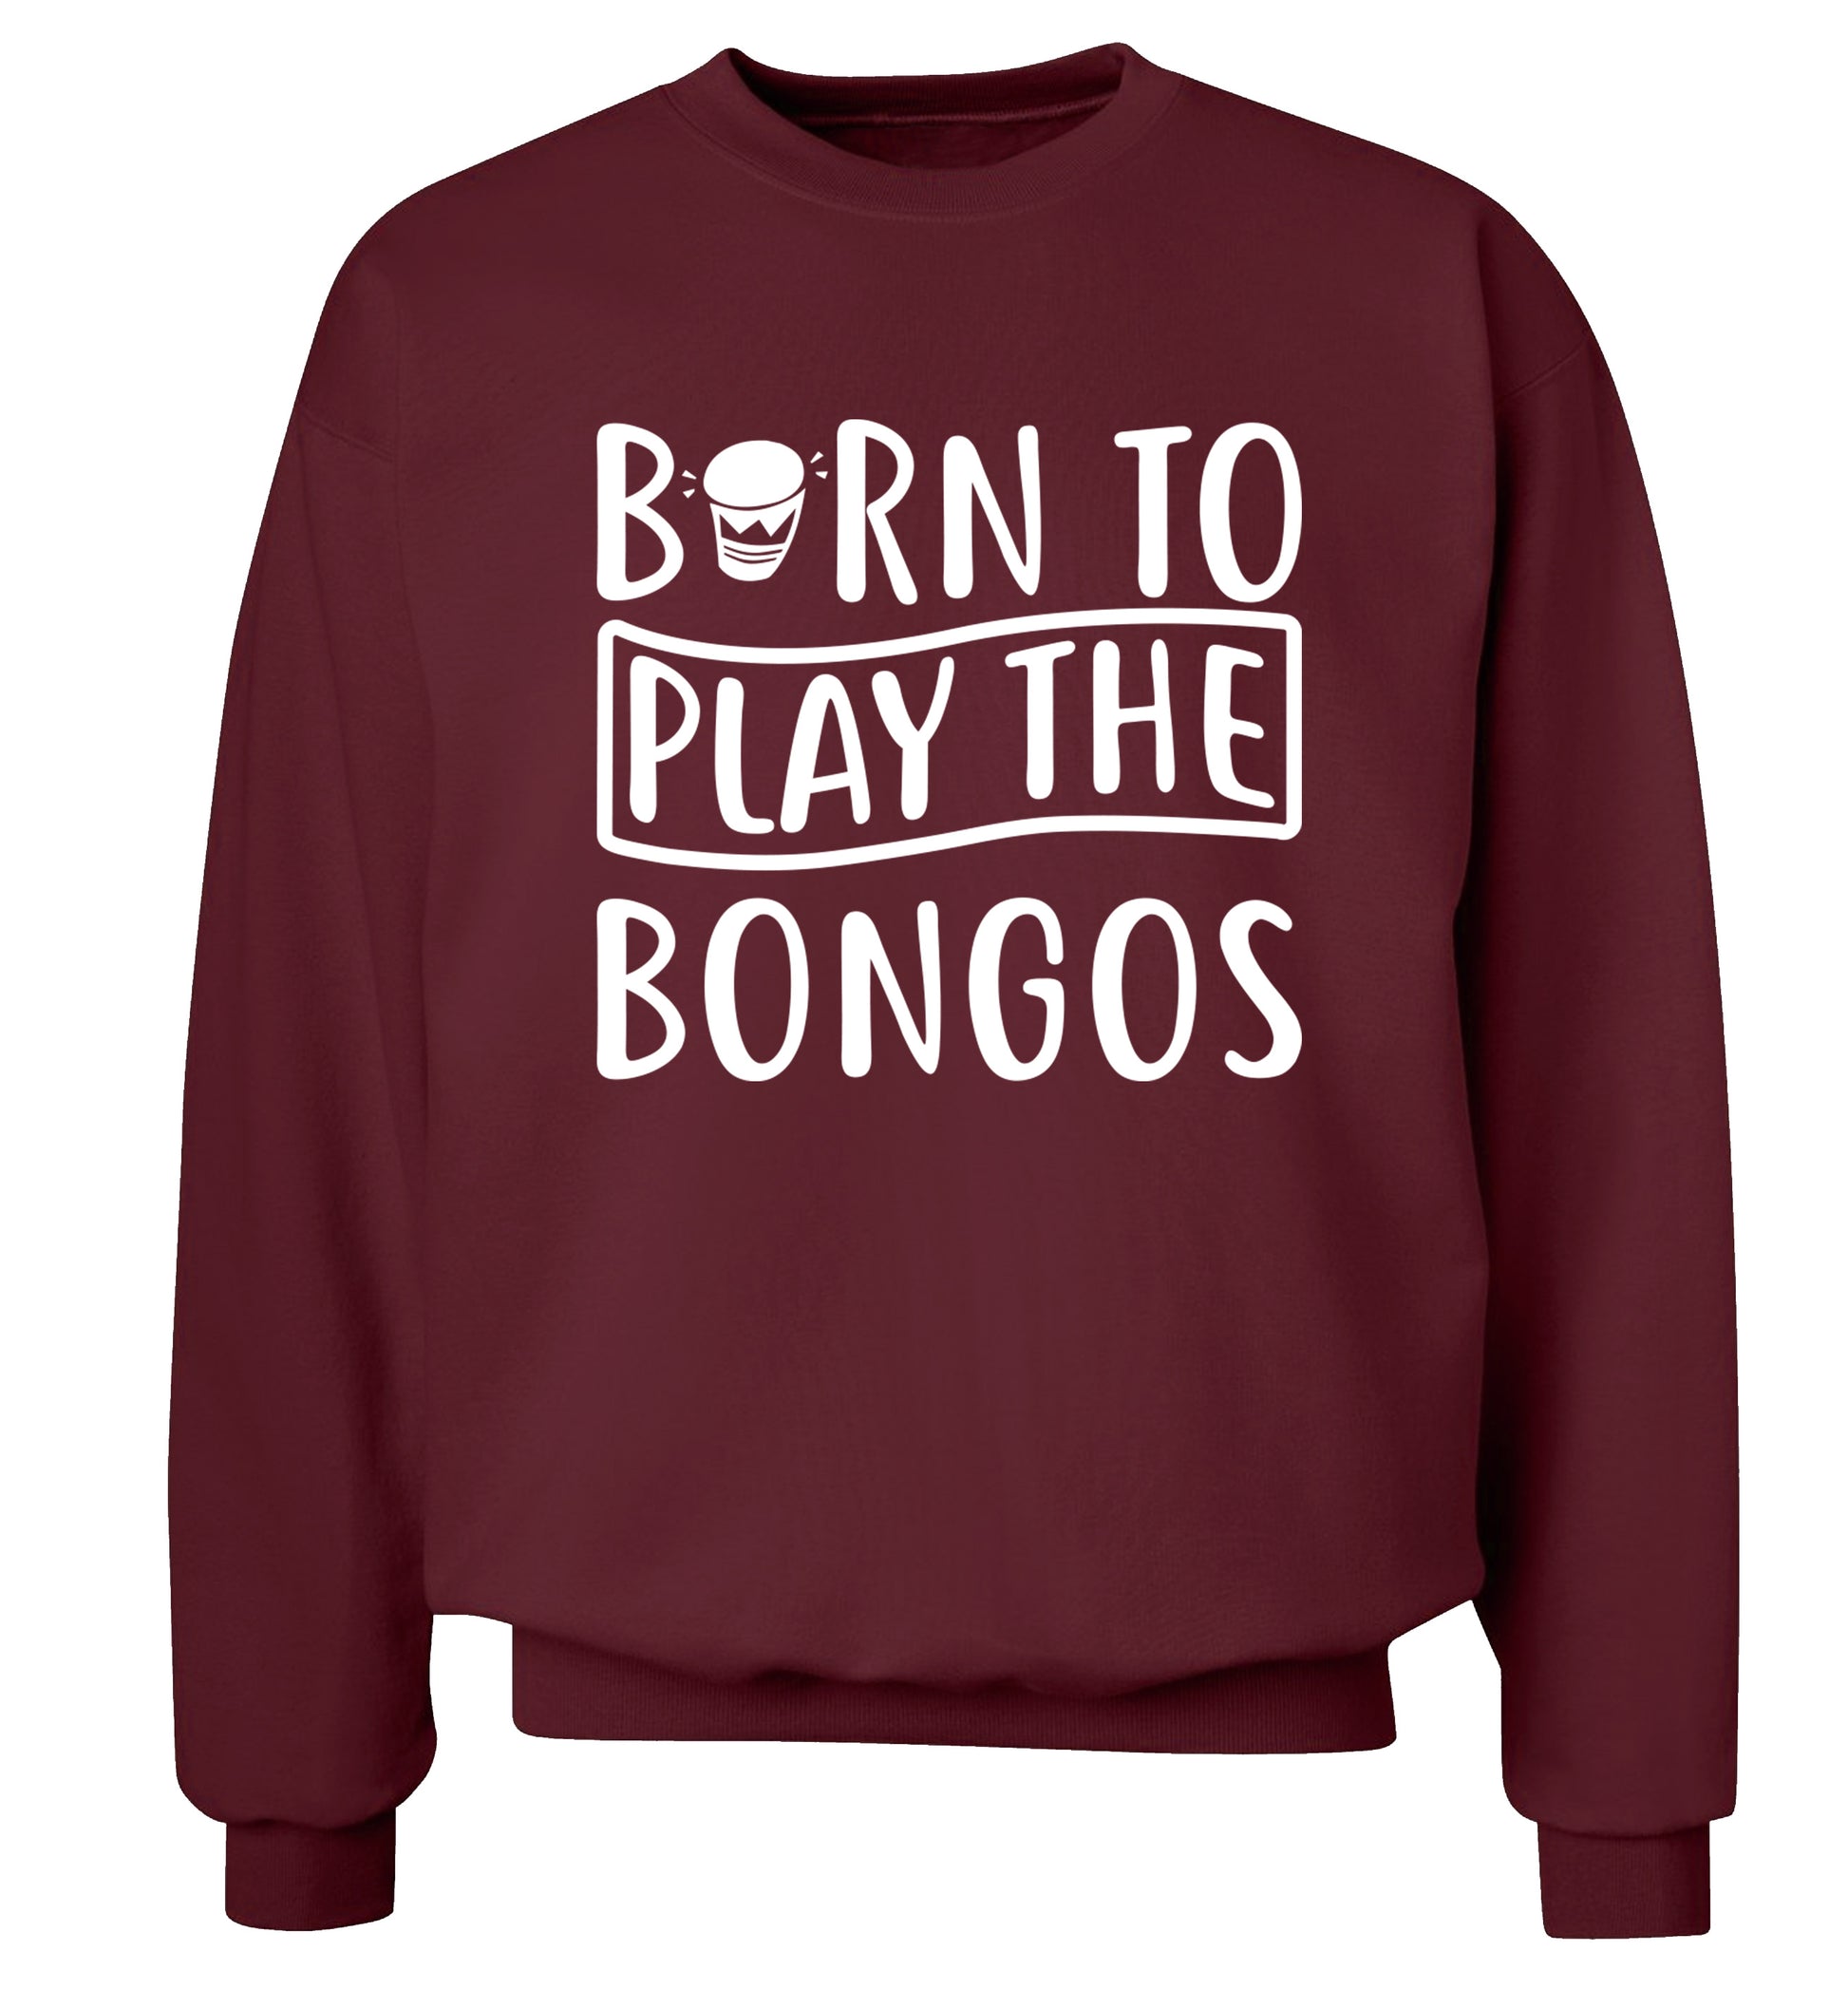 Born to play the bongos Adult's unisex maroon Sweater 2XL